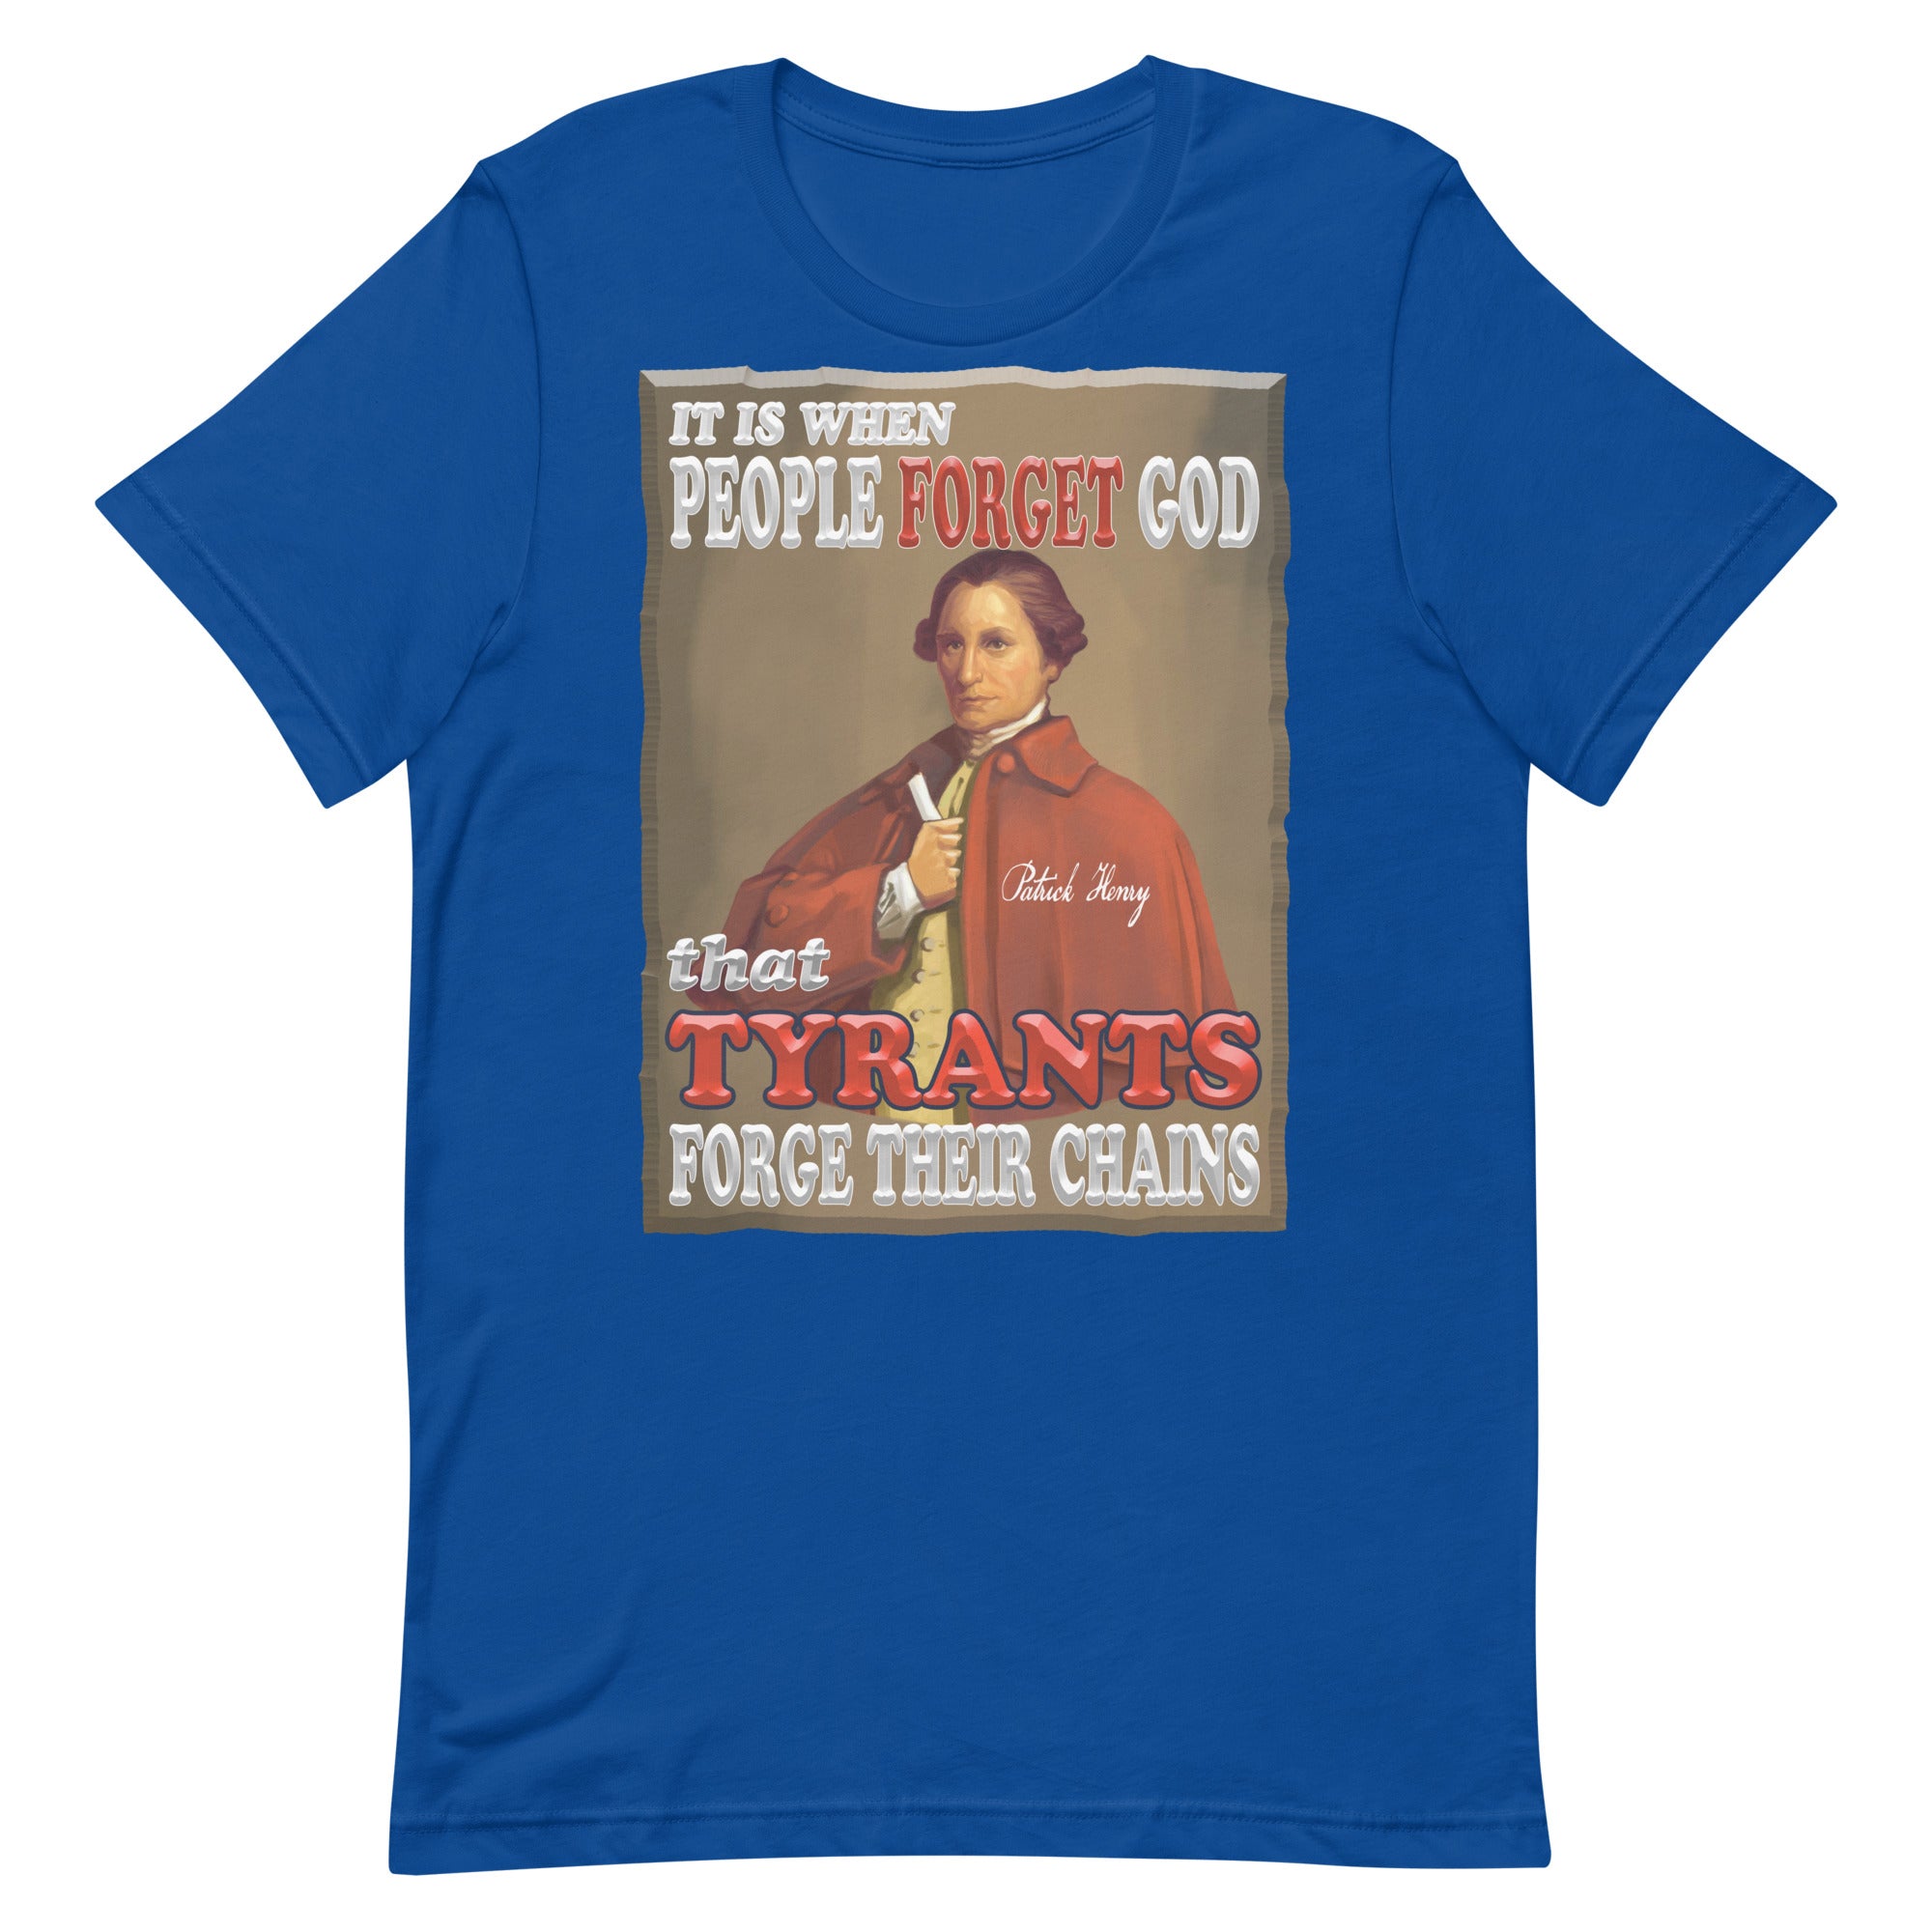 PATRICK HENRY  -IT IS WHEN PEOPLE FORGET GOD  THAT TYRANTS FORGE THEIR CHAINS